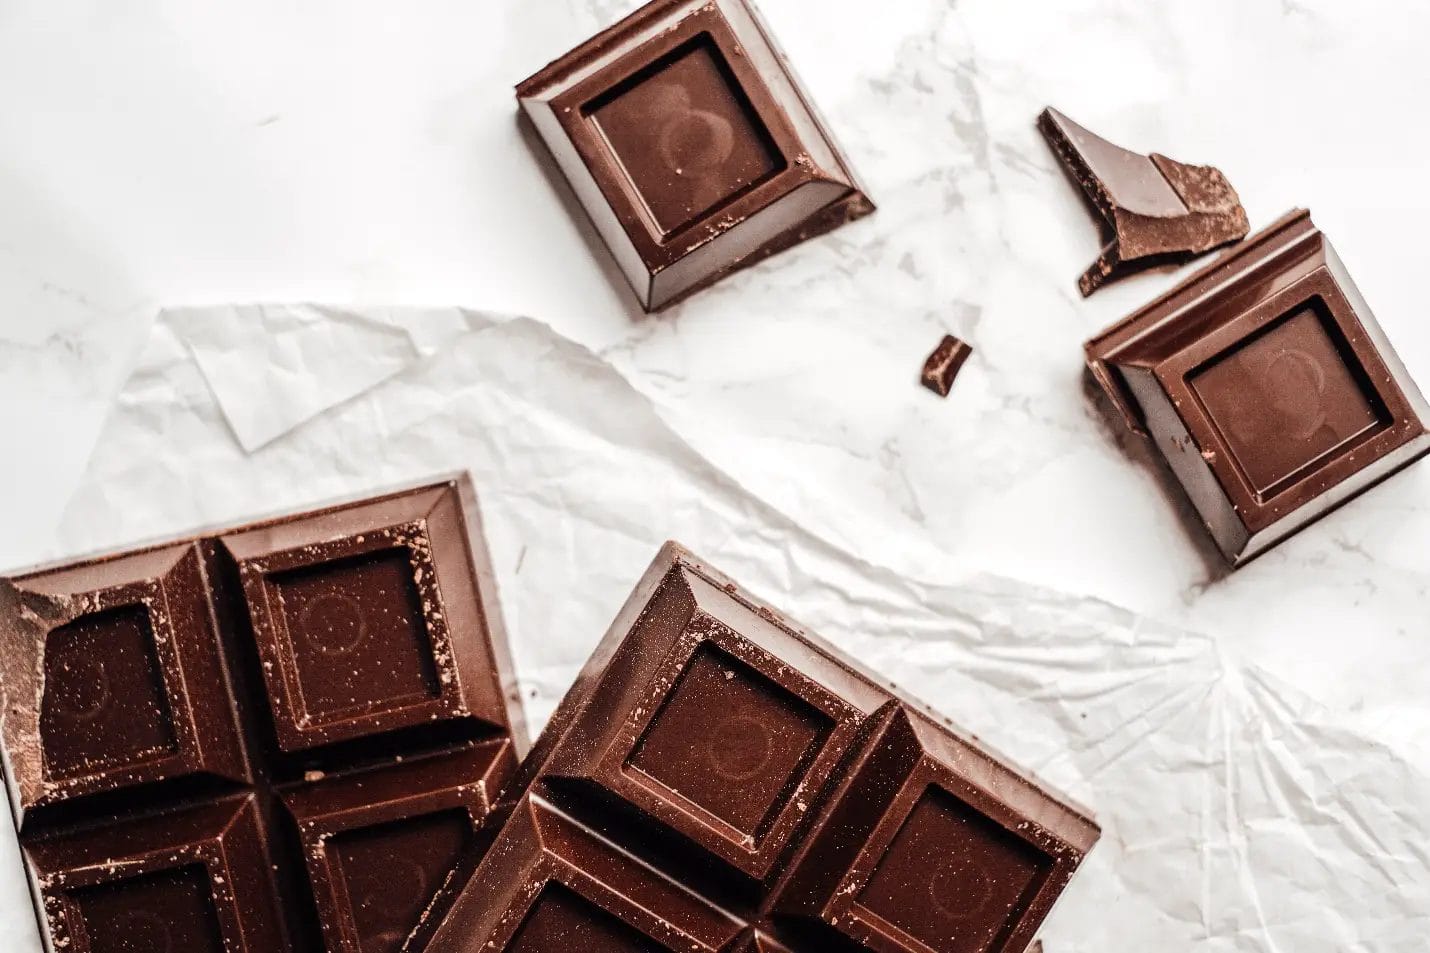 Why Do We Love Chocolate so Much